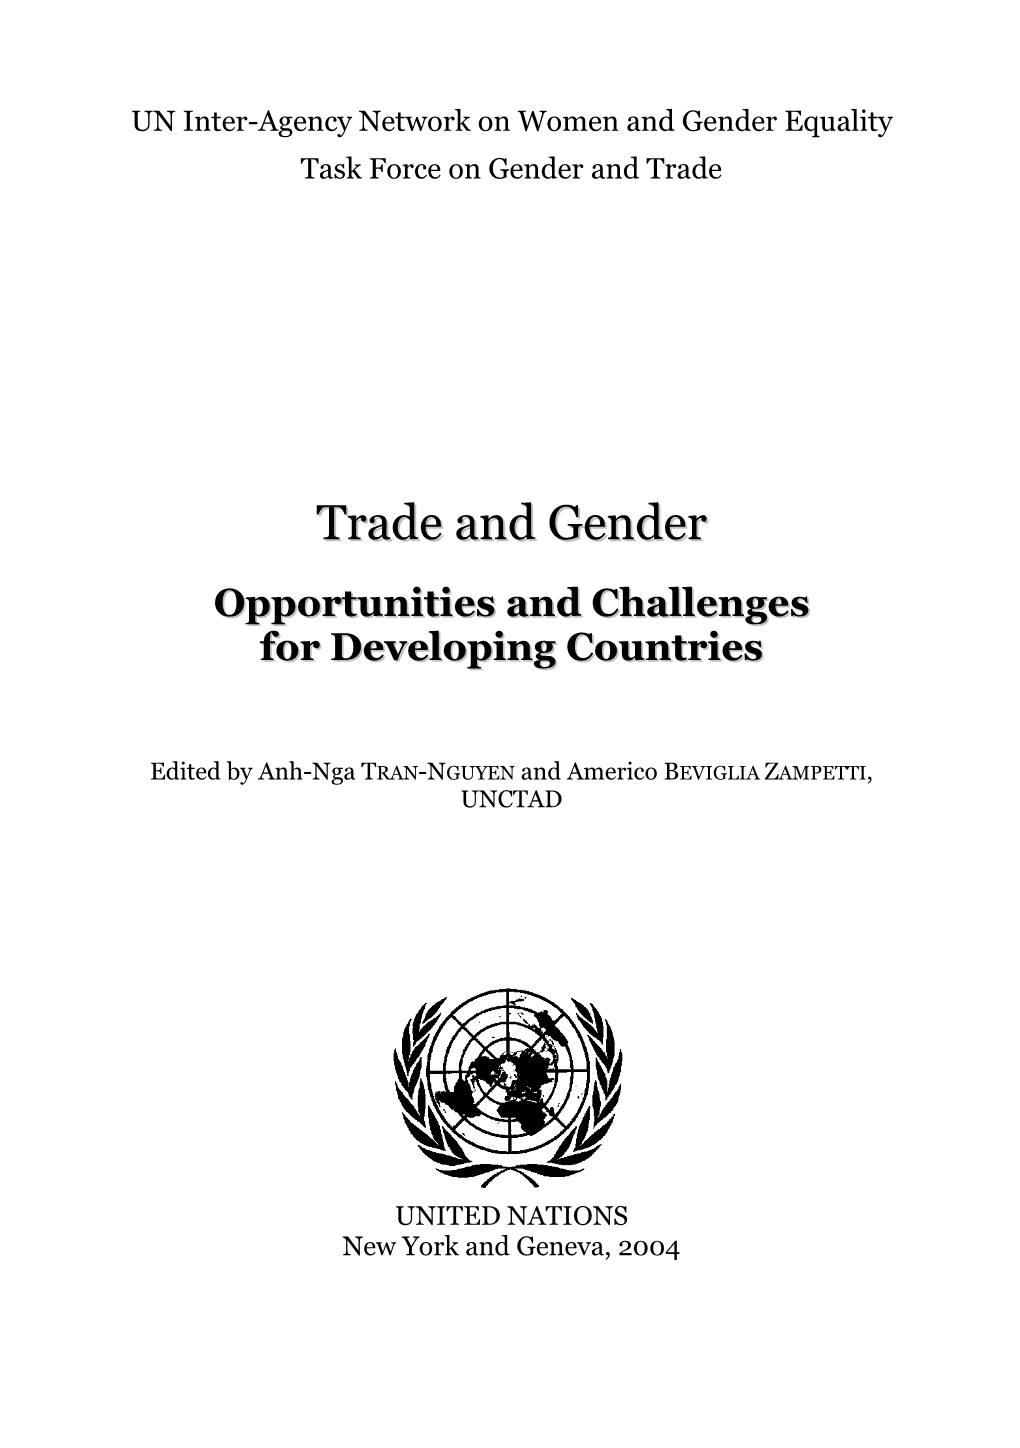 Trade and Gender: Opportunities and Challenges for Developing Countries